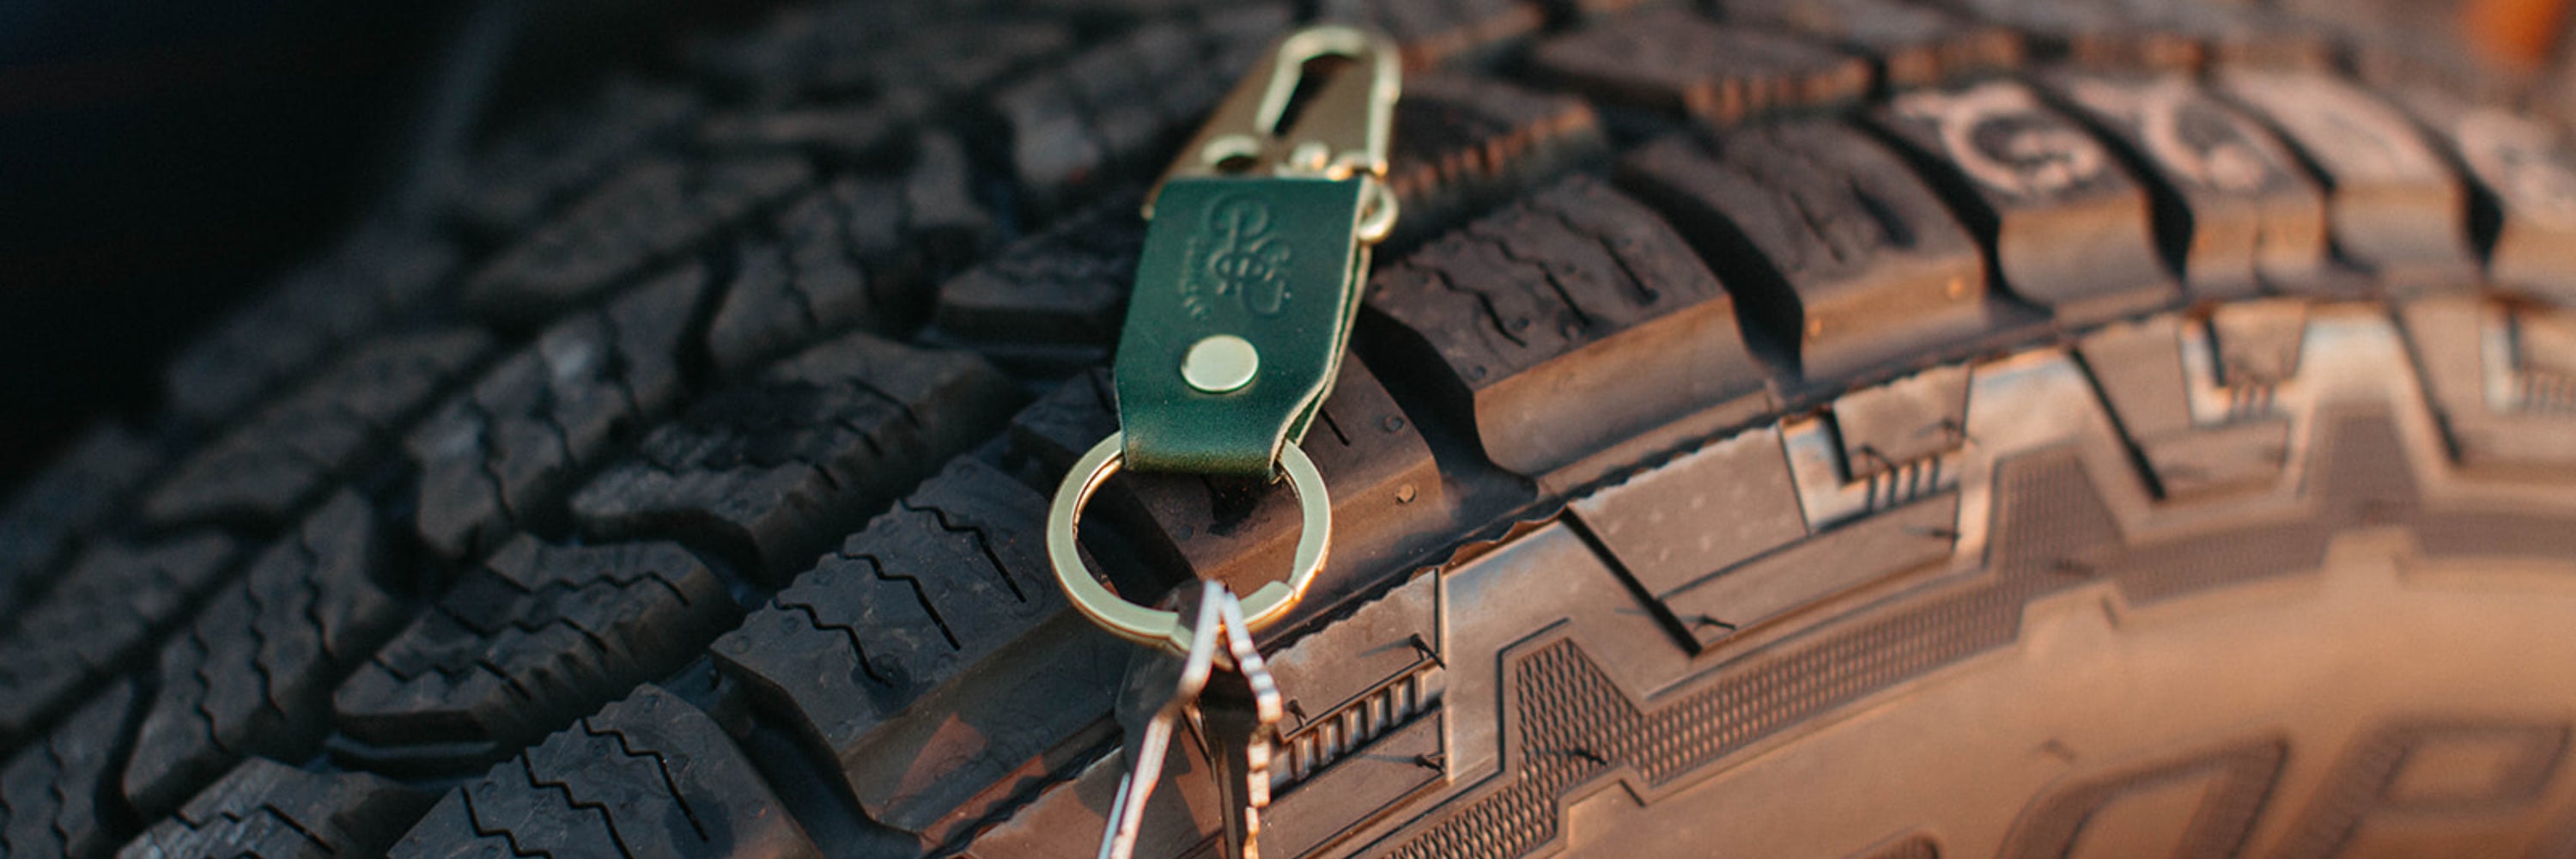 Stubby keychain in full grain leather hangs on butt pocket of a pair of levi's denim jeans